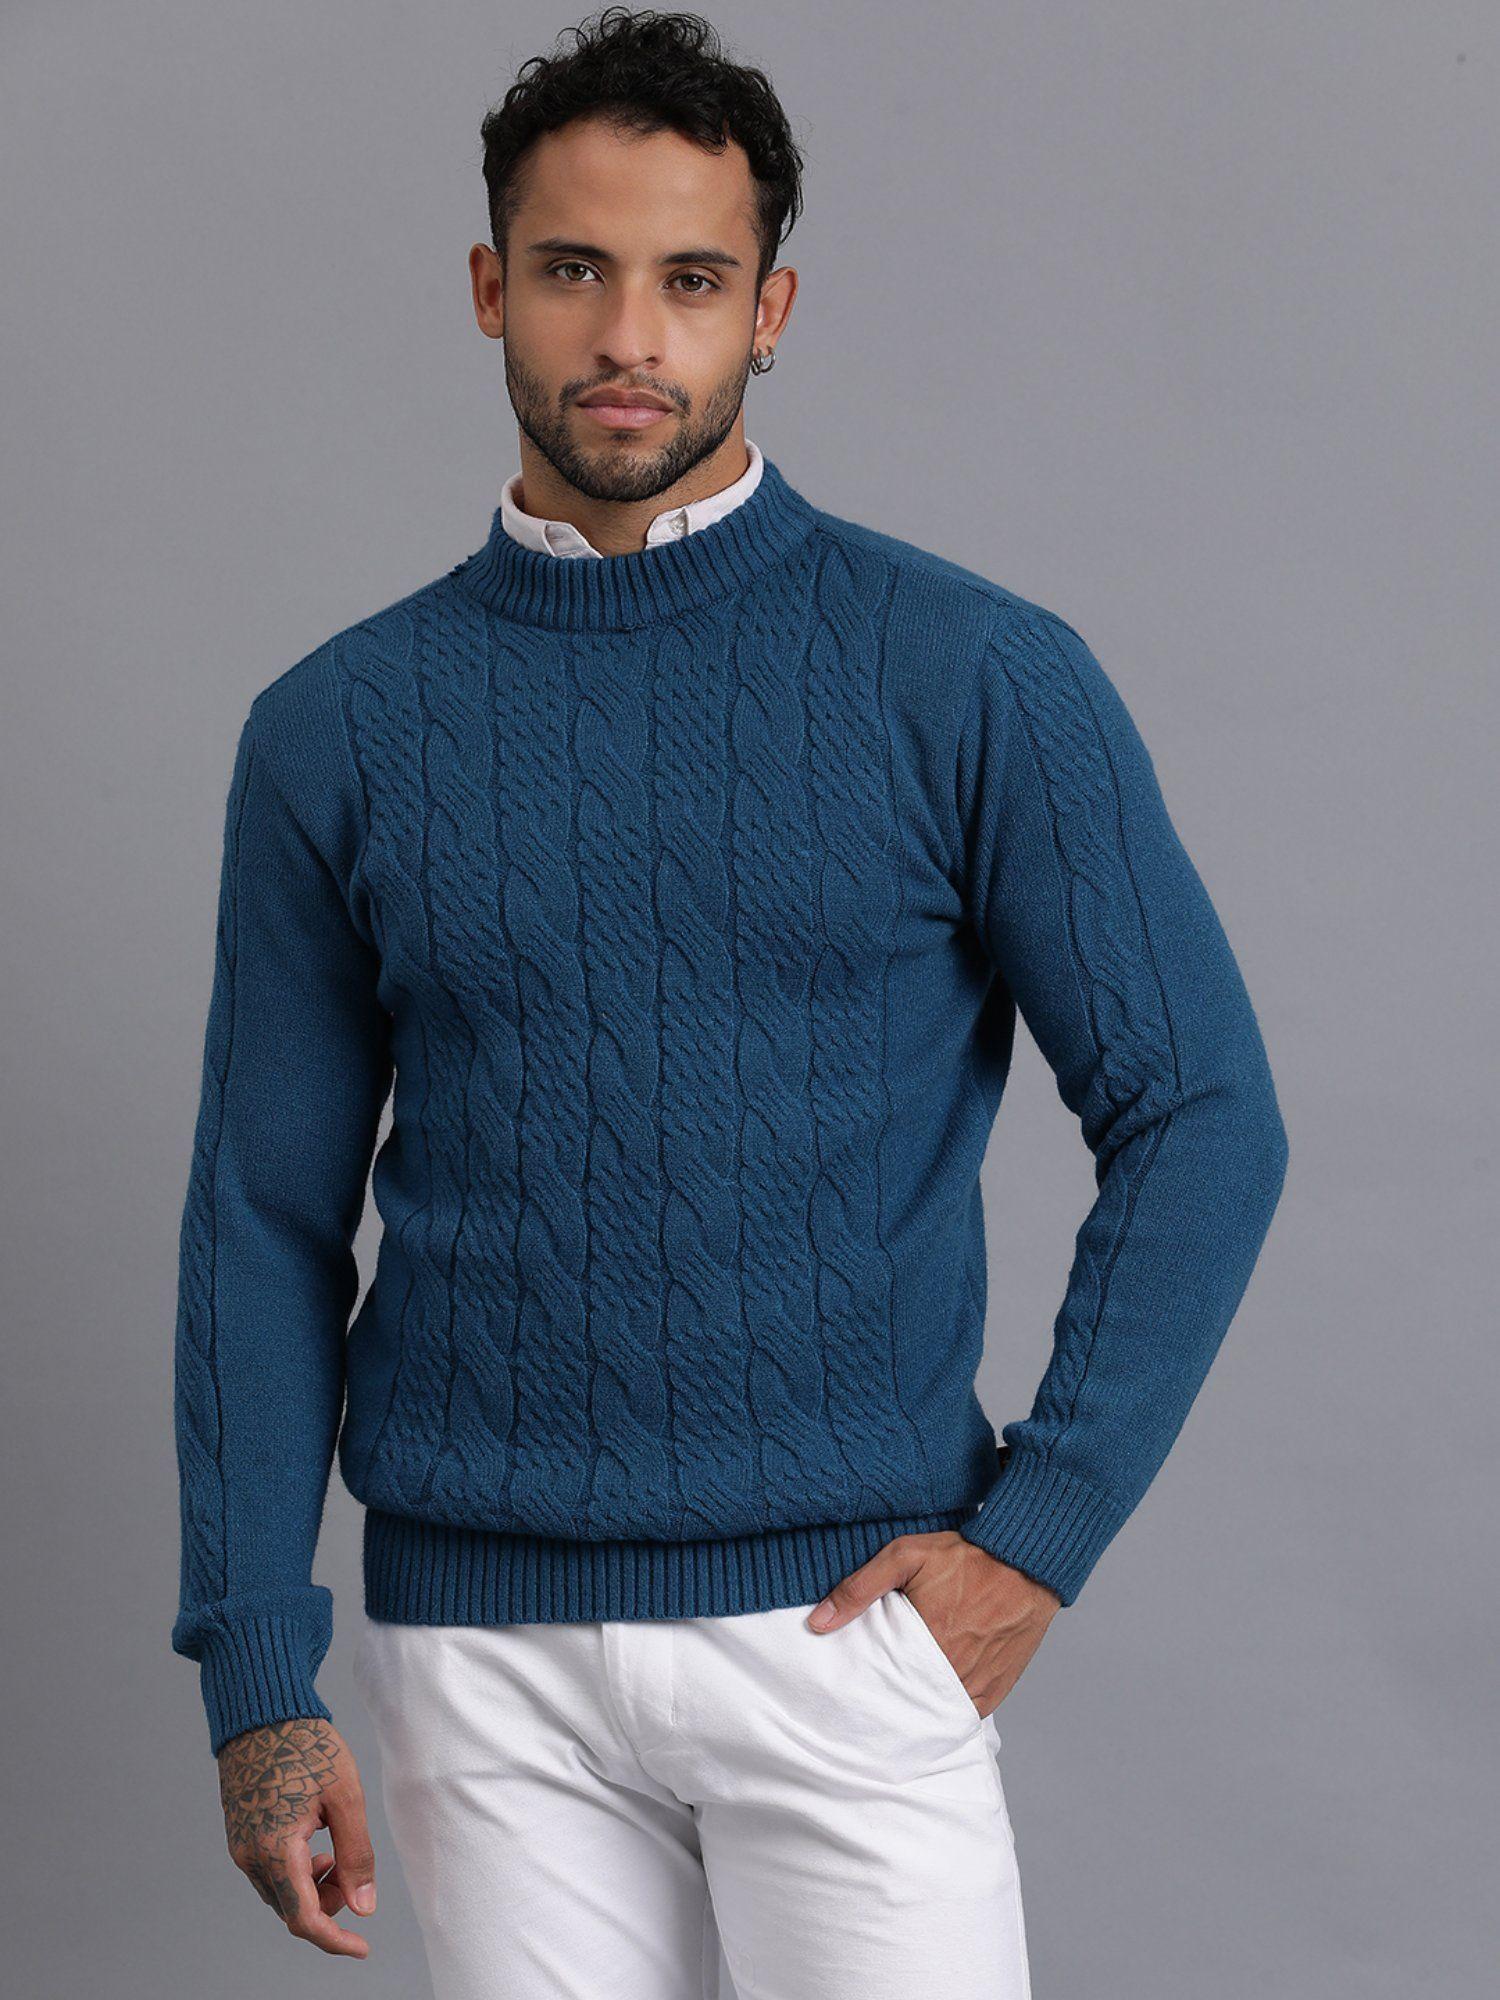 peacock blue luxury heavy cable knitted mens wool pullover sweater